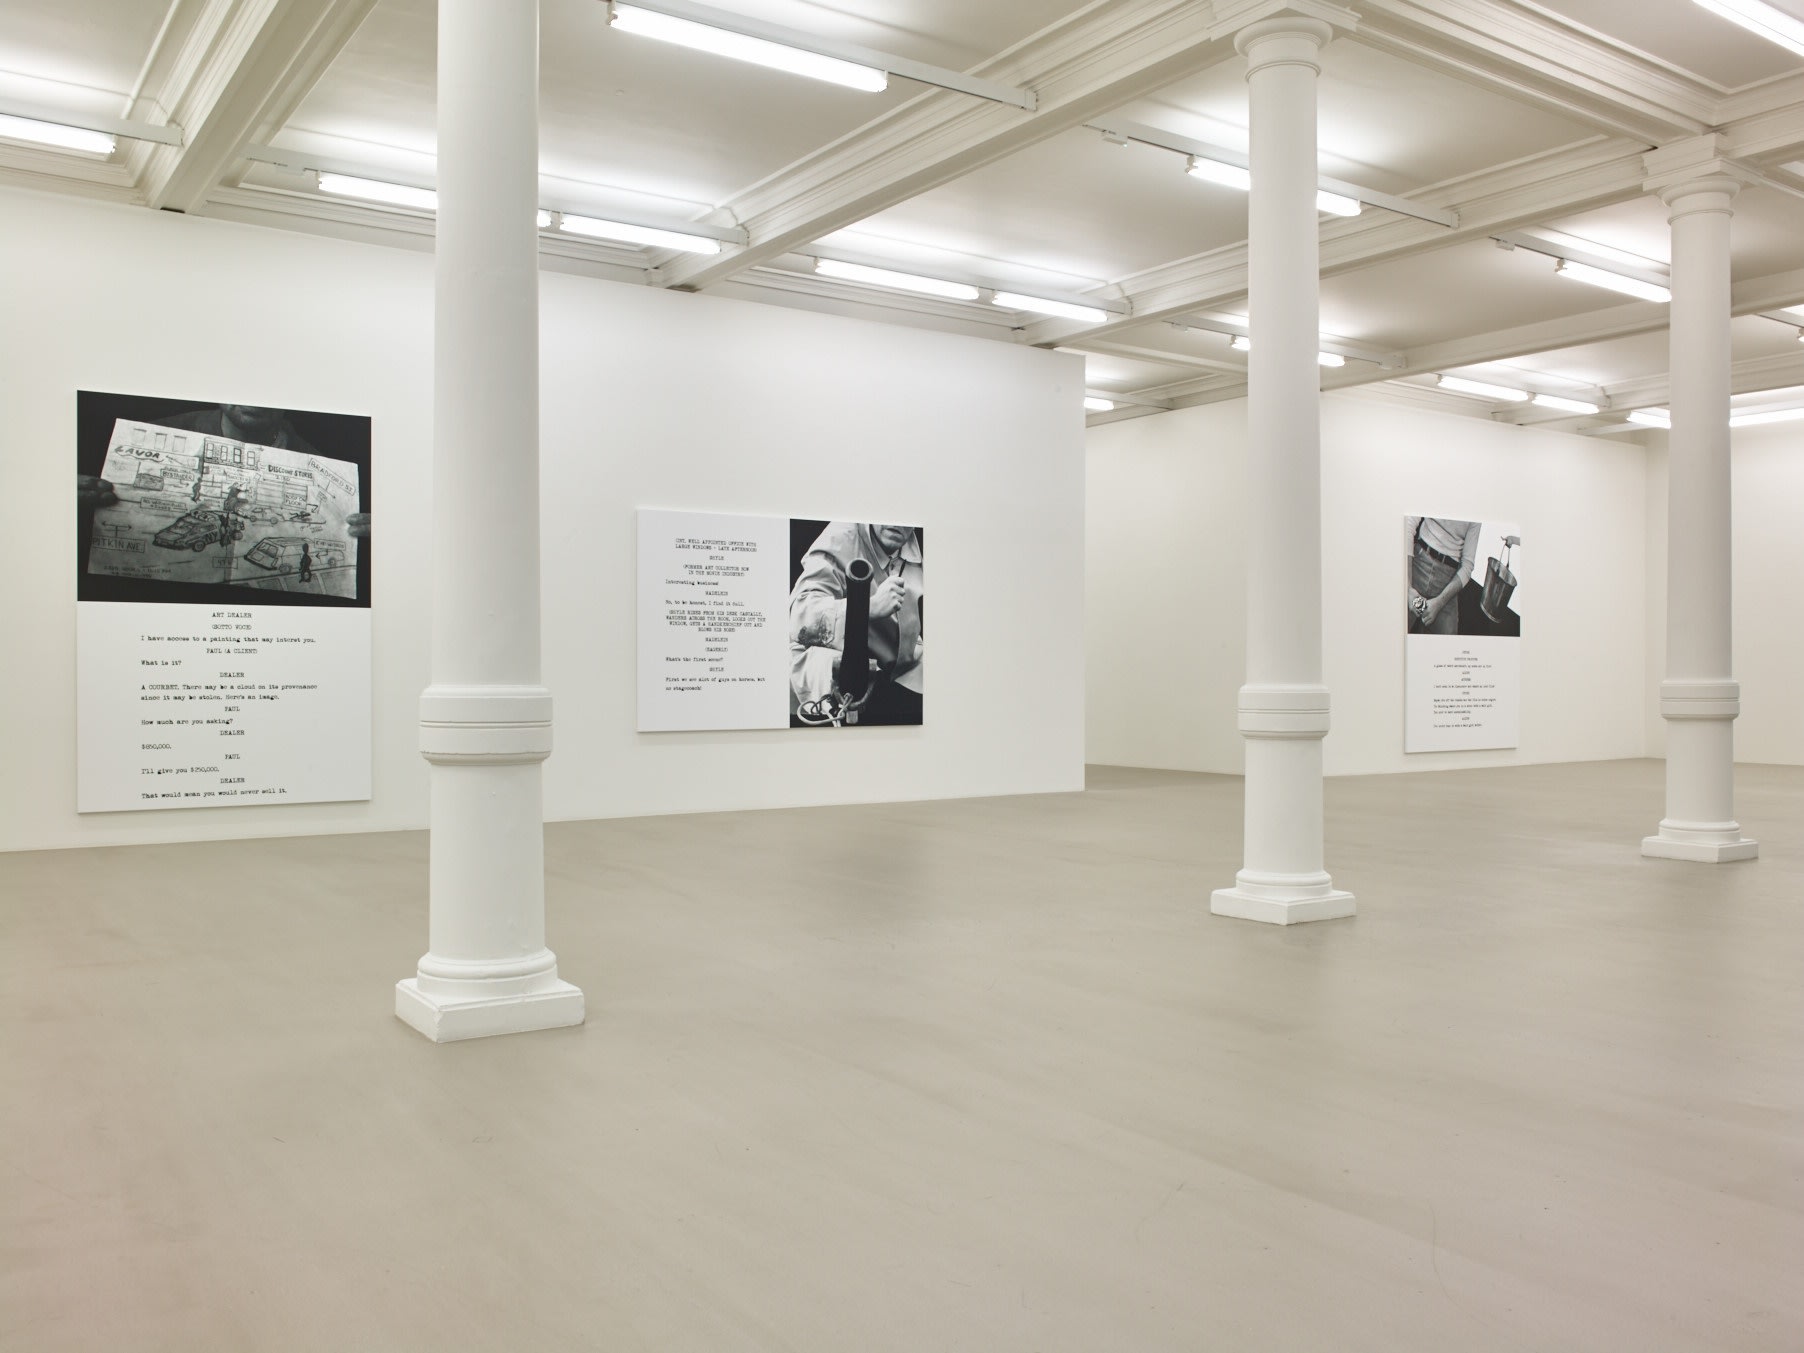 In a large white space with columns and a long skylight, 3 large paintings hang. Each are roughly half image and half text, which is in the format of a film script.